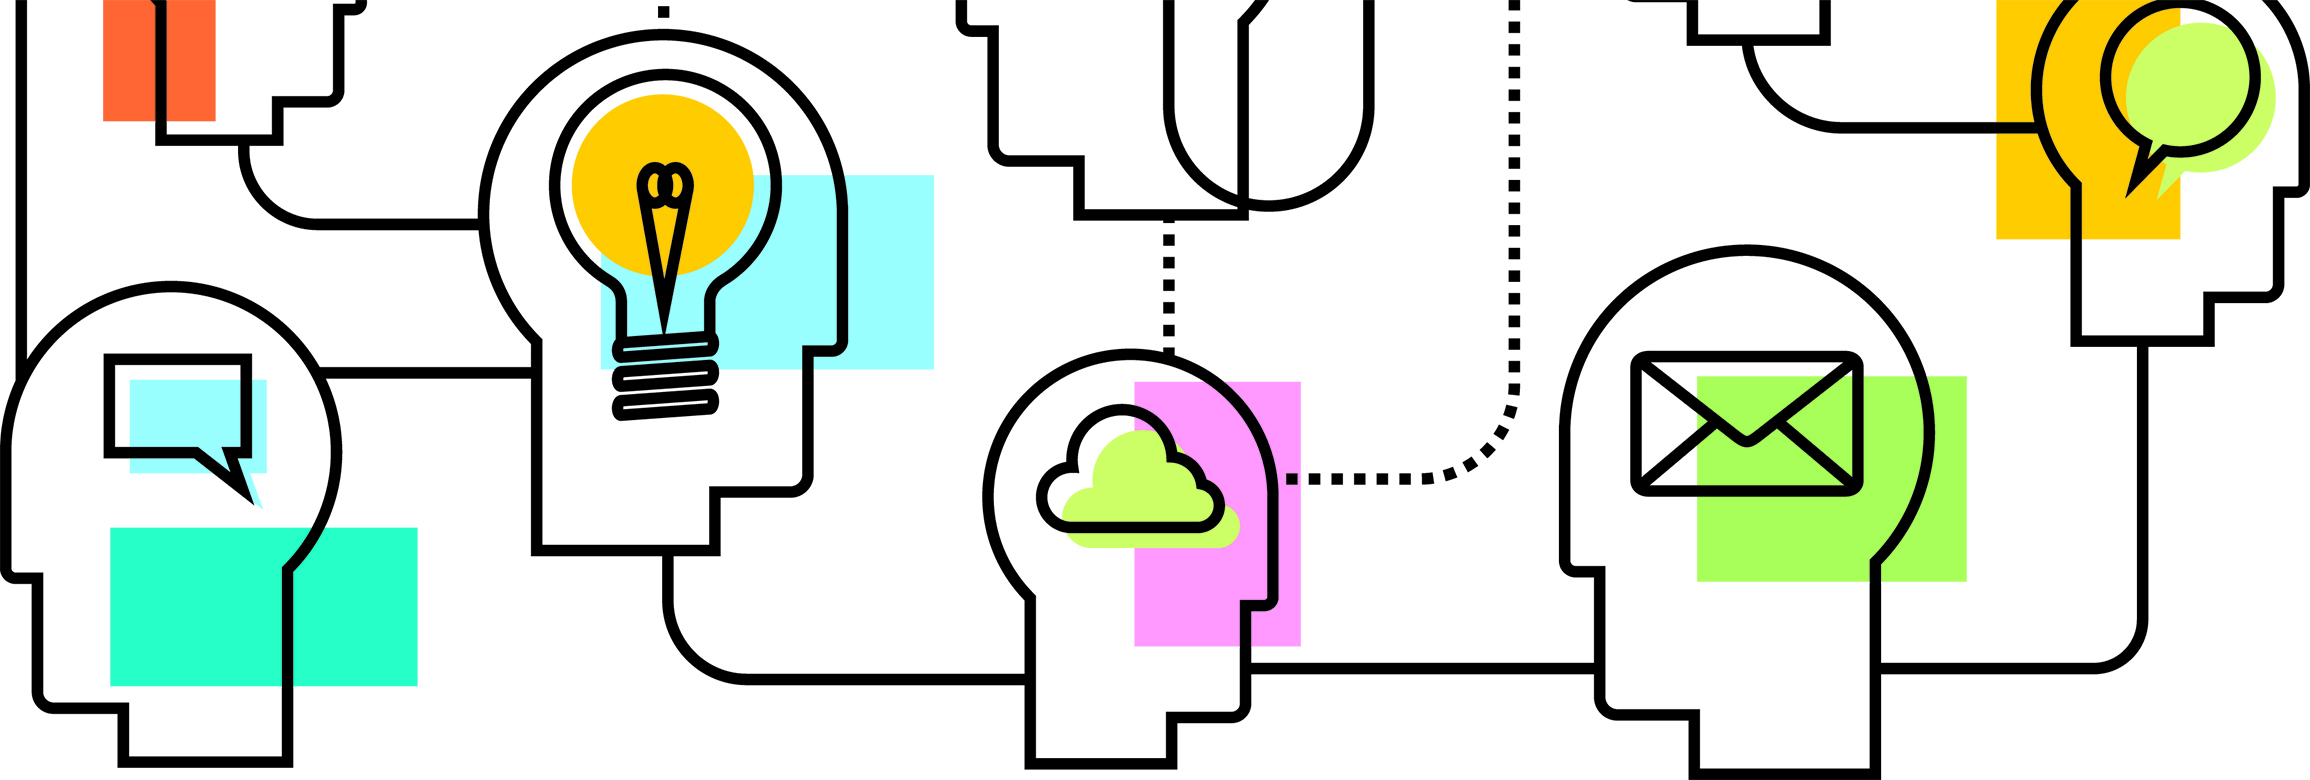 An illustration of a group of heads in profile. Each head contains an icon representing a different method of communication.